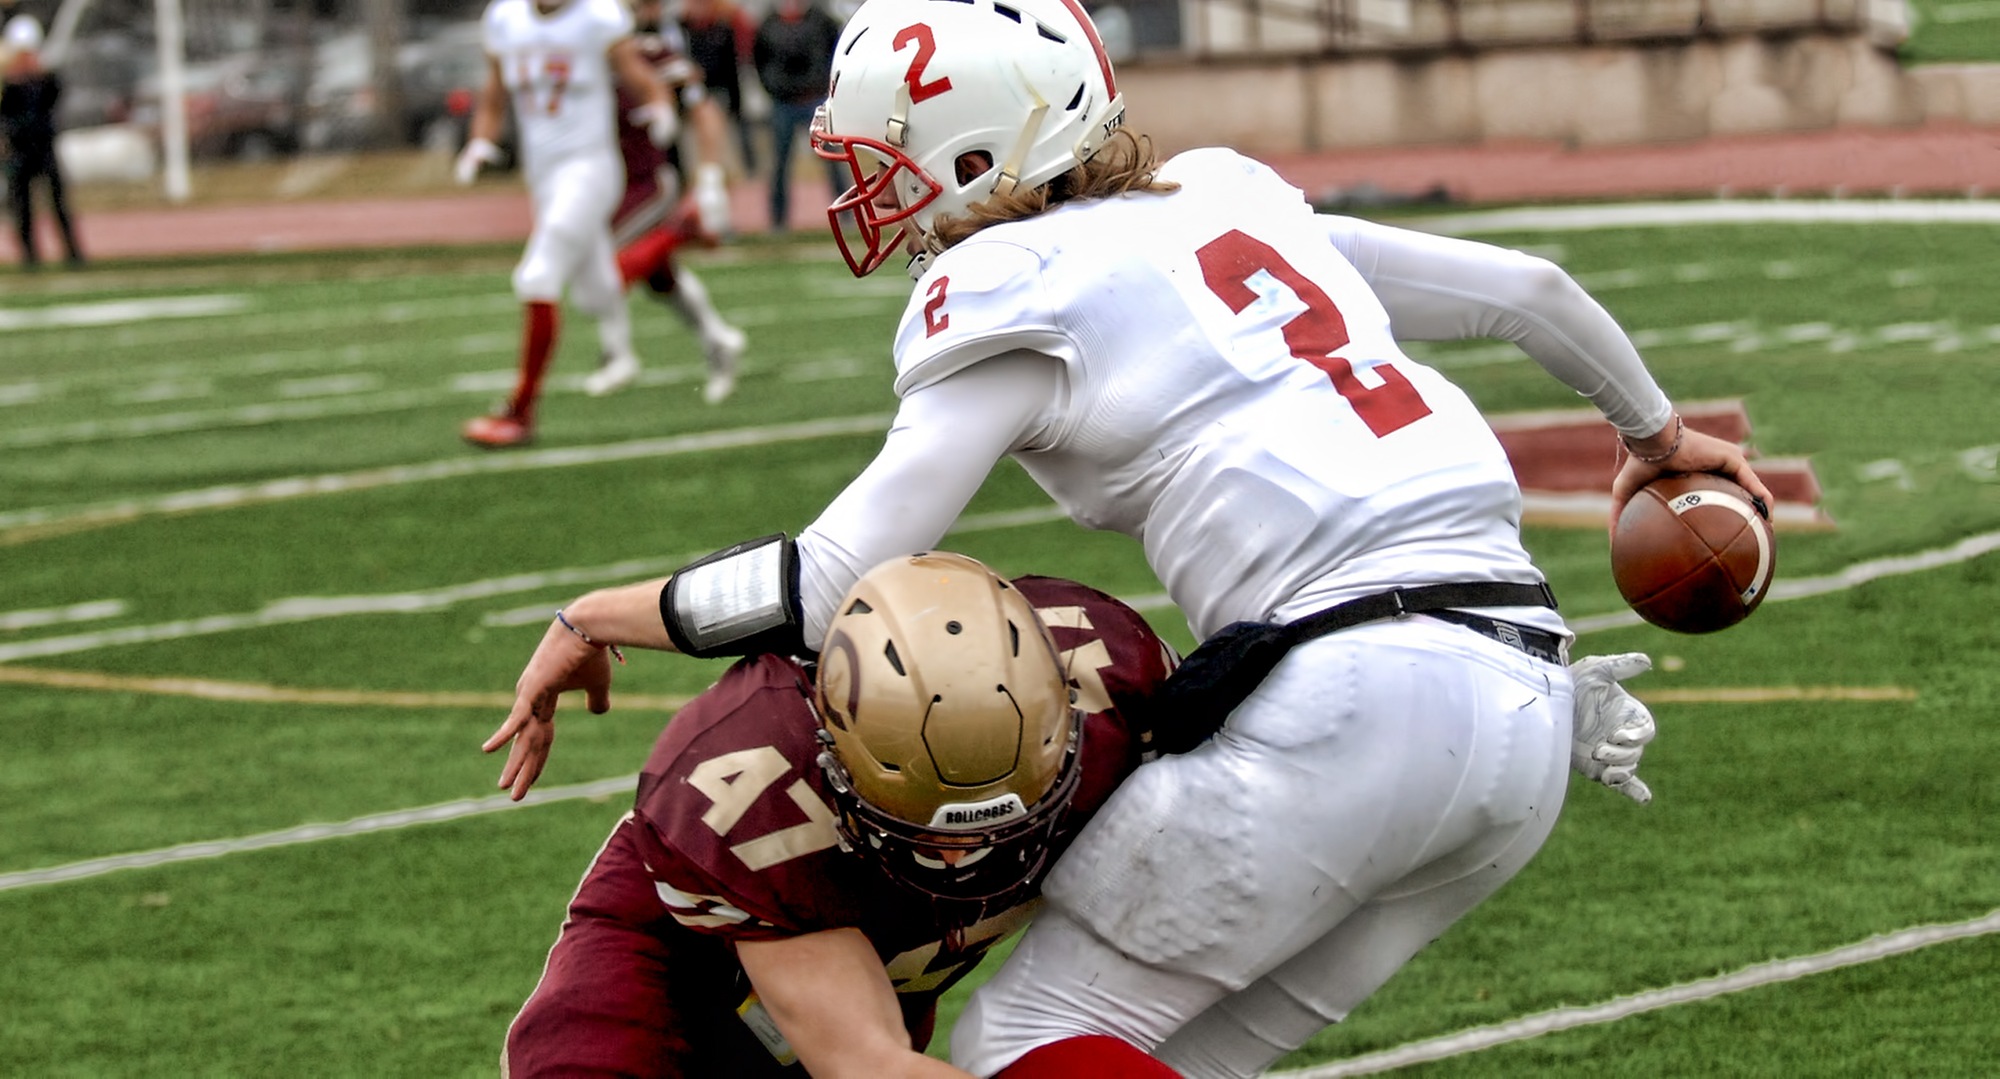 Sam Michel had a game-high 13 tackles and also made an interception in the Cobbers' win at No.4-ranked St. John's.